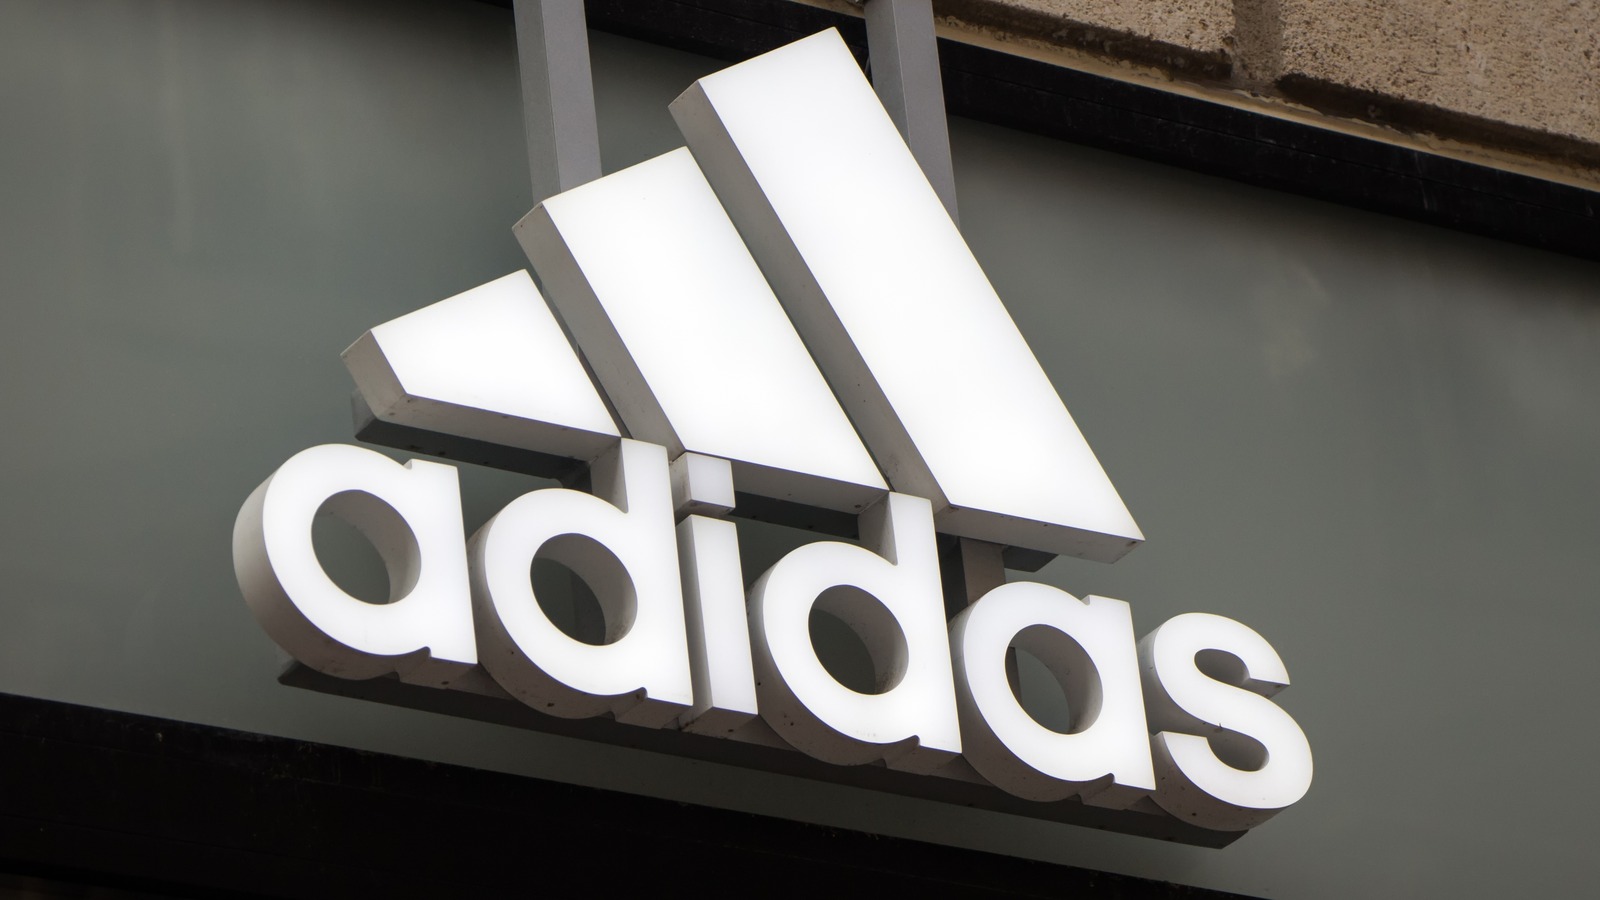 Adidas's new ad campaign has sparked controversy – but anything